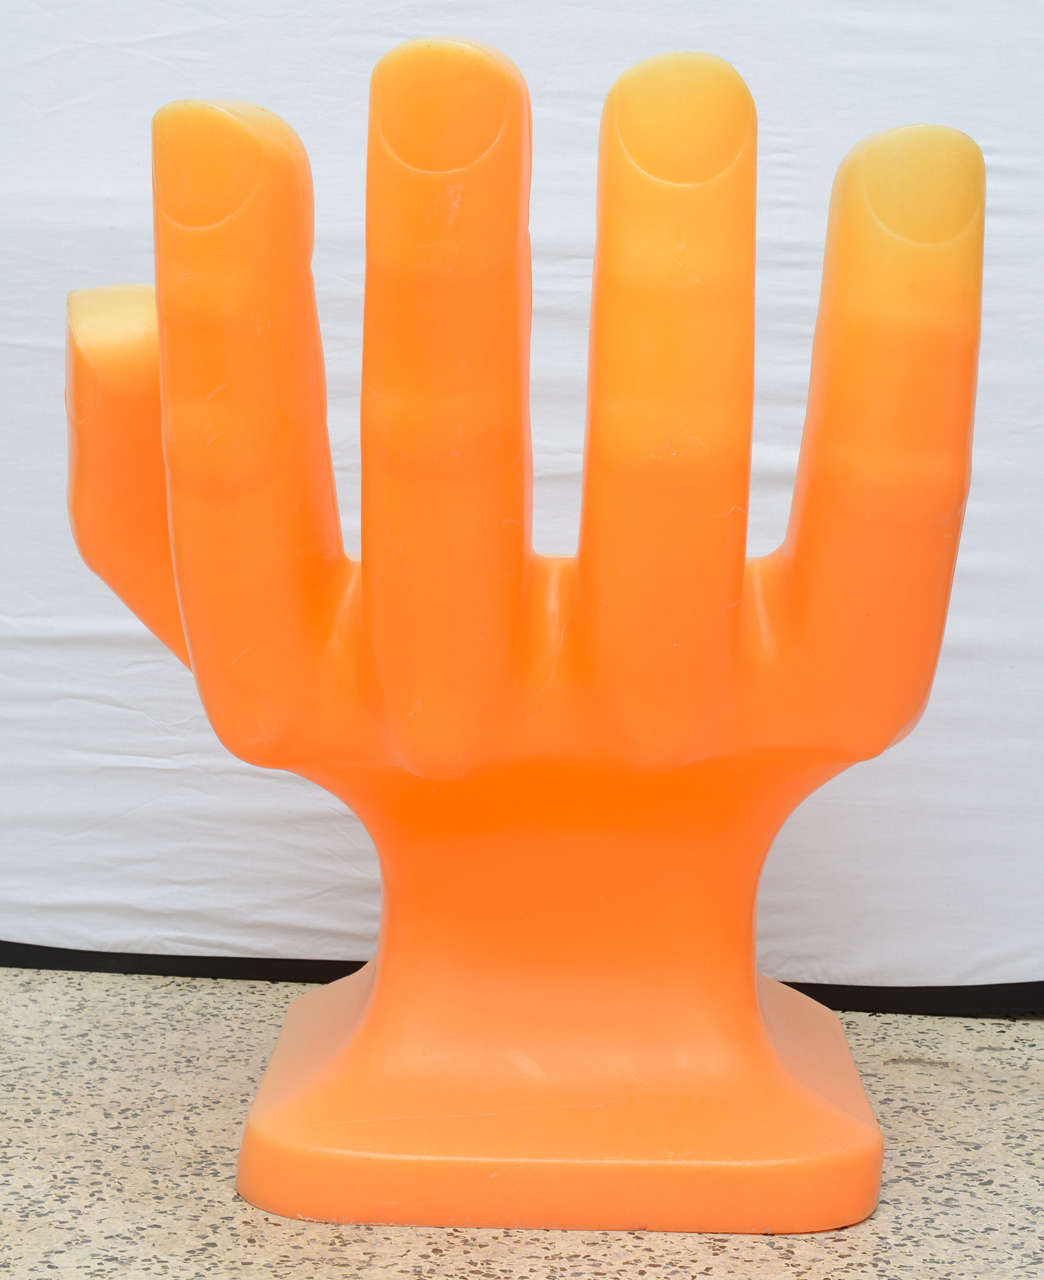 Iconic Plastic Hand Chair, USA, Late 1960s at 1stDibs